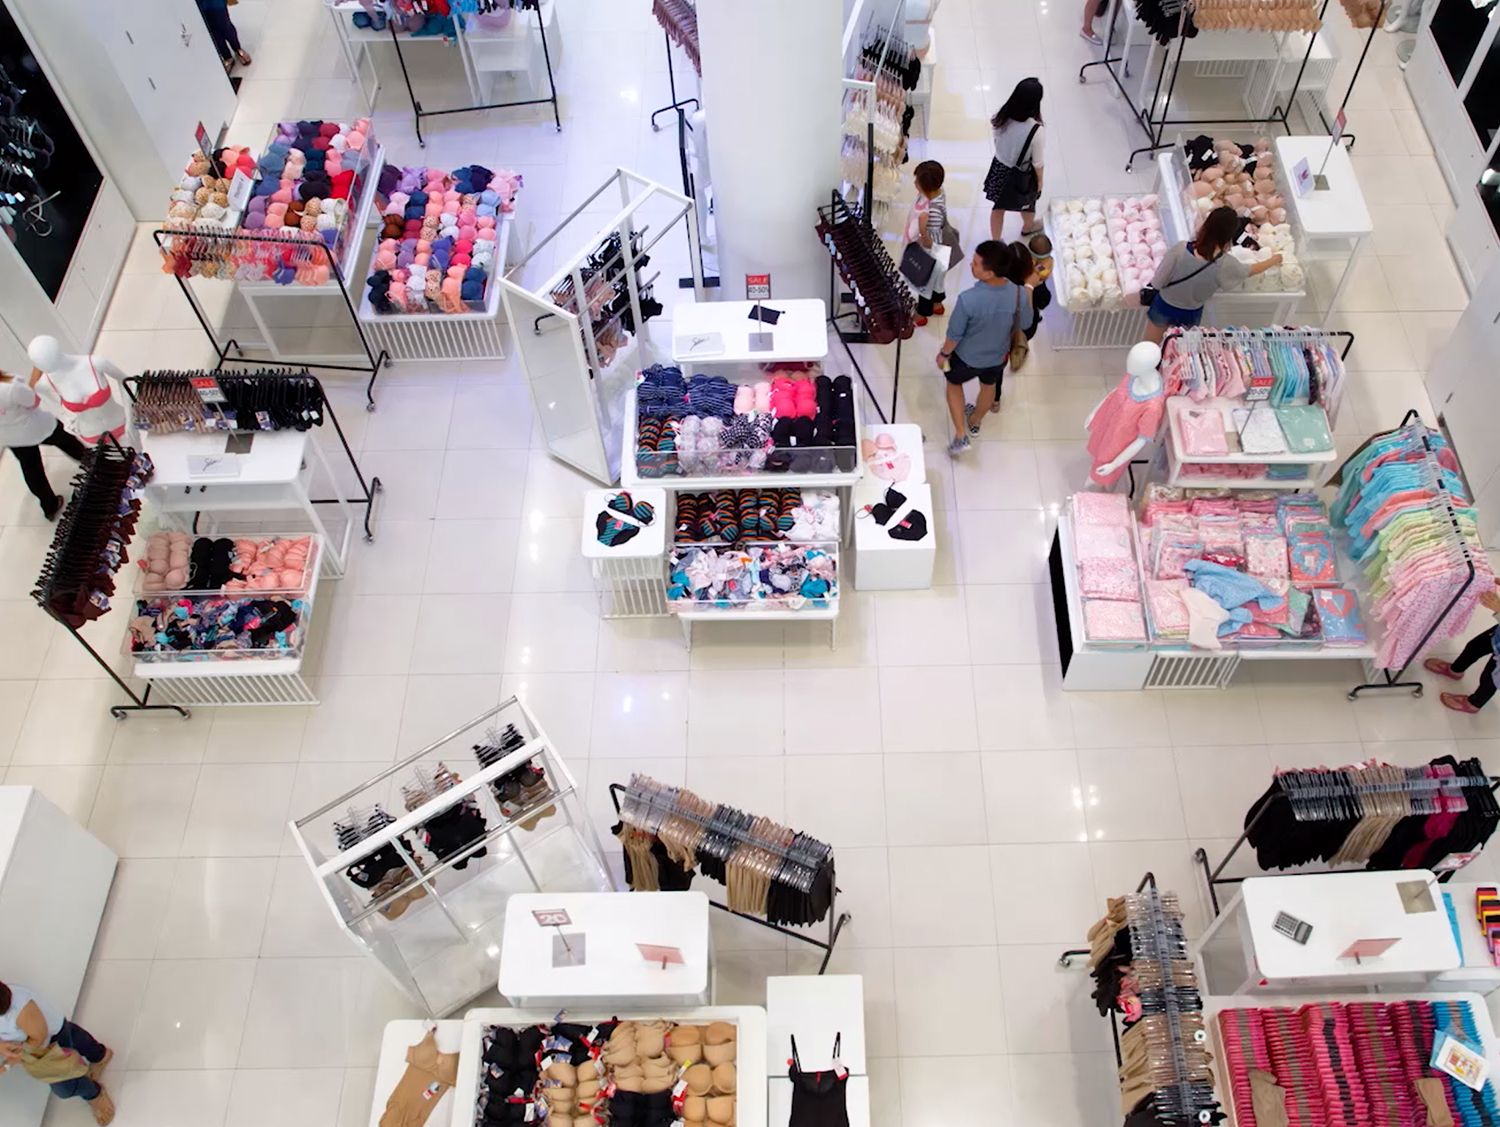 Overhead view of a store interior